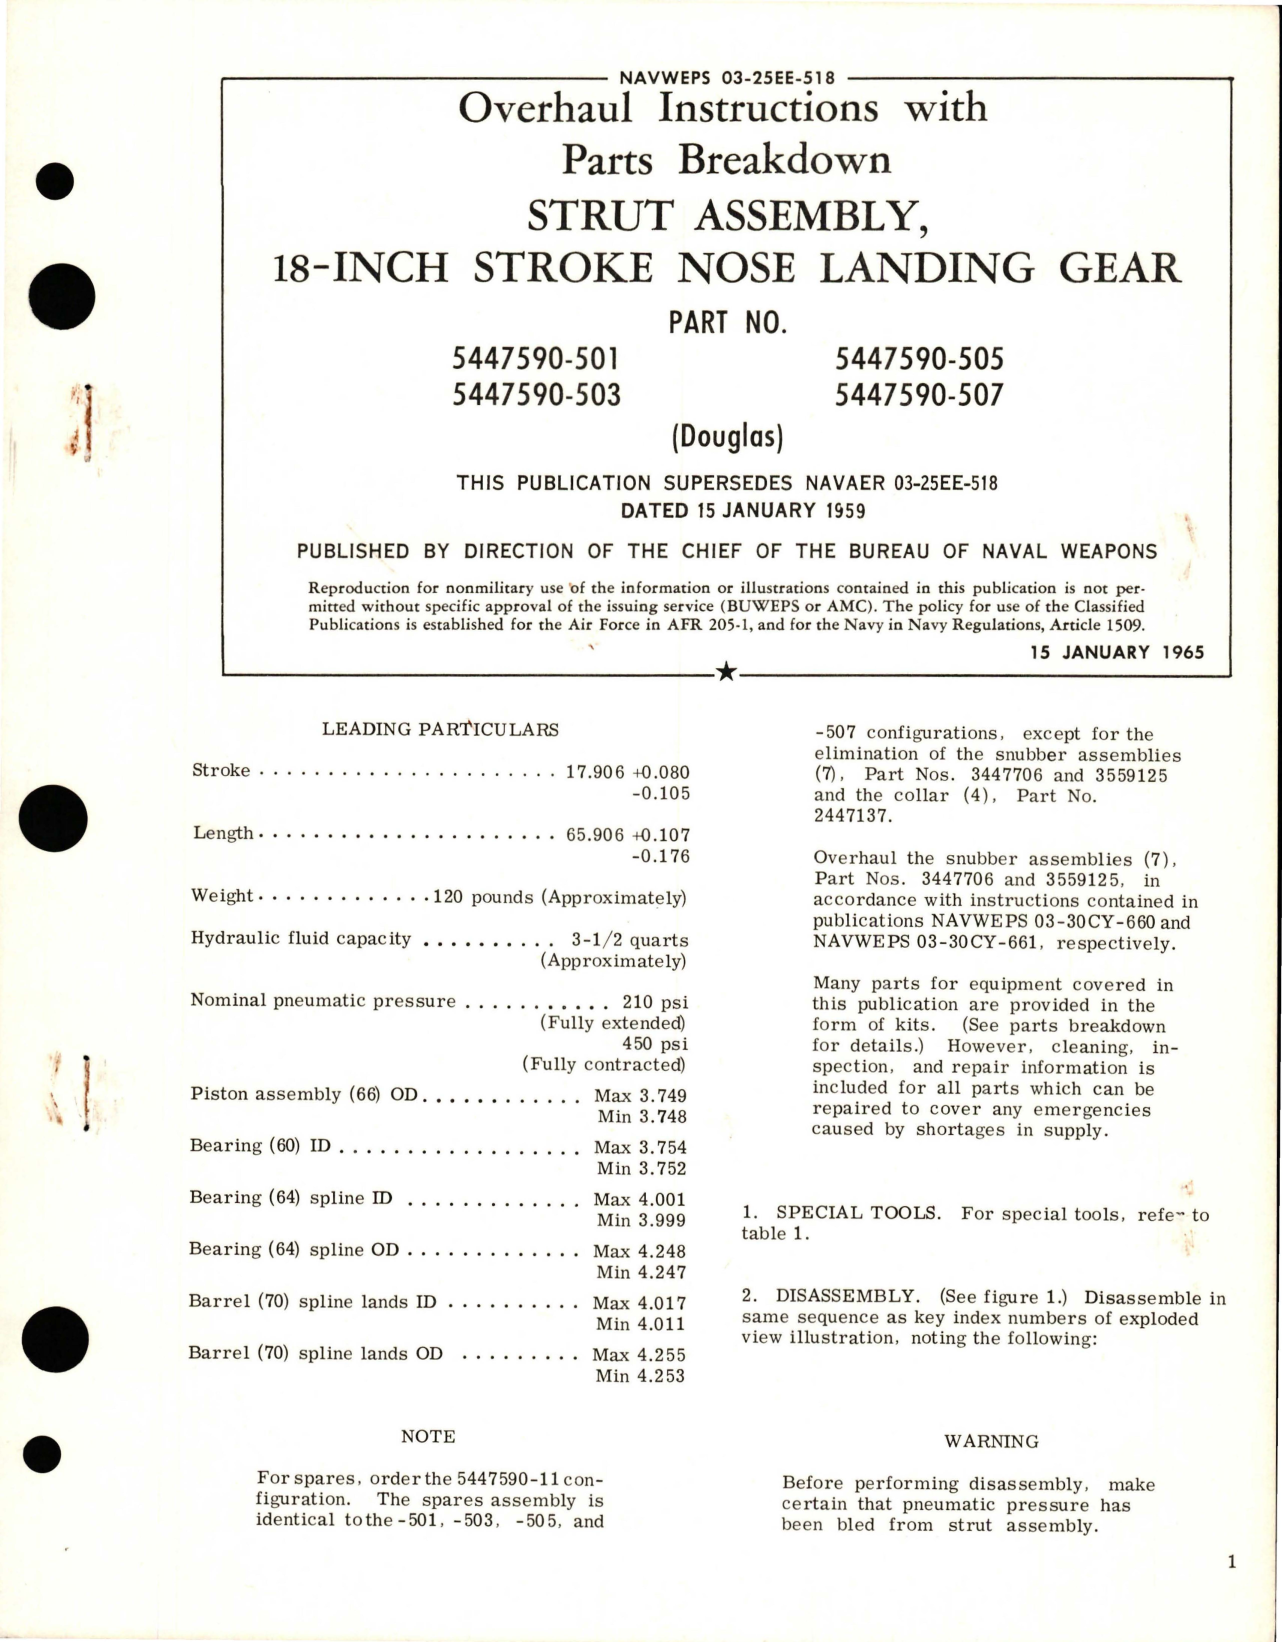 Sample page 1 from AirCorps Library document: Overhaul Instructions with Parts Breakdown for 18-Inch Stroke Nose Landing Gear Strut Assembly